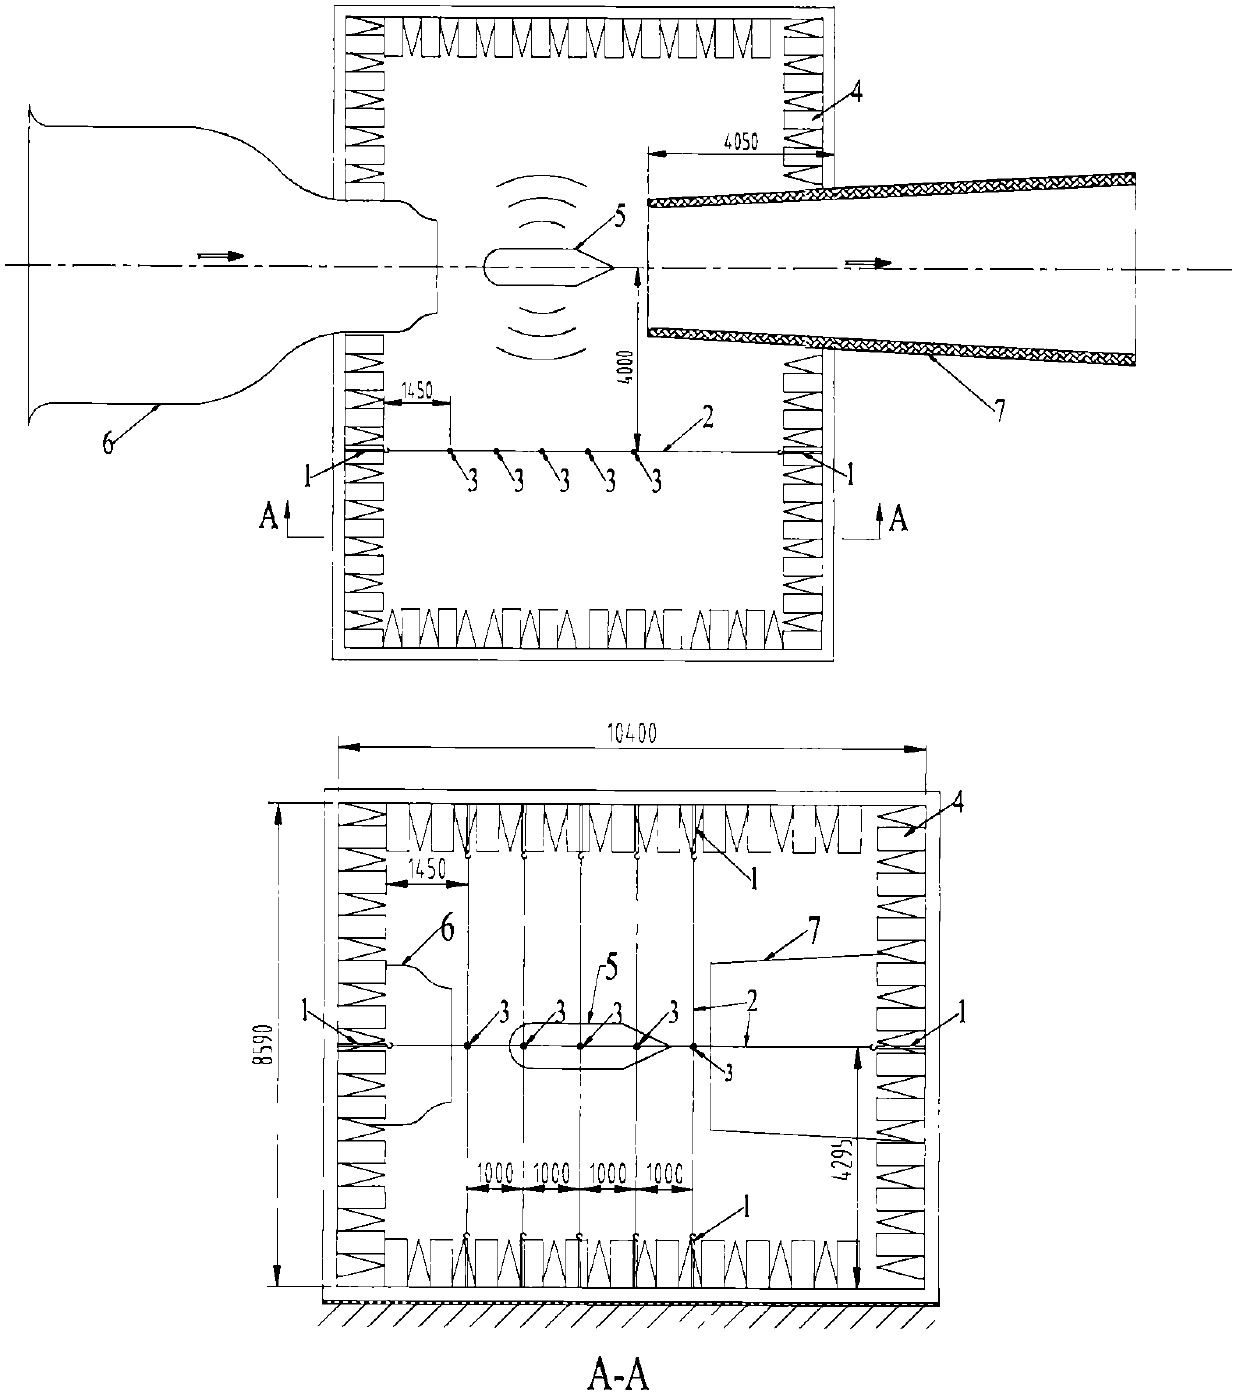 Sensor installation device for acoustic wind tunnel test